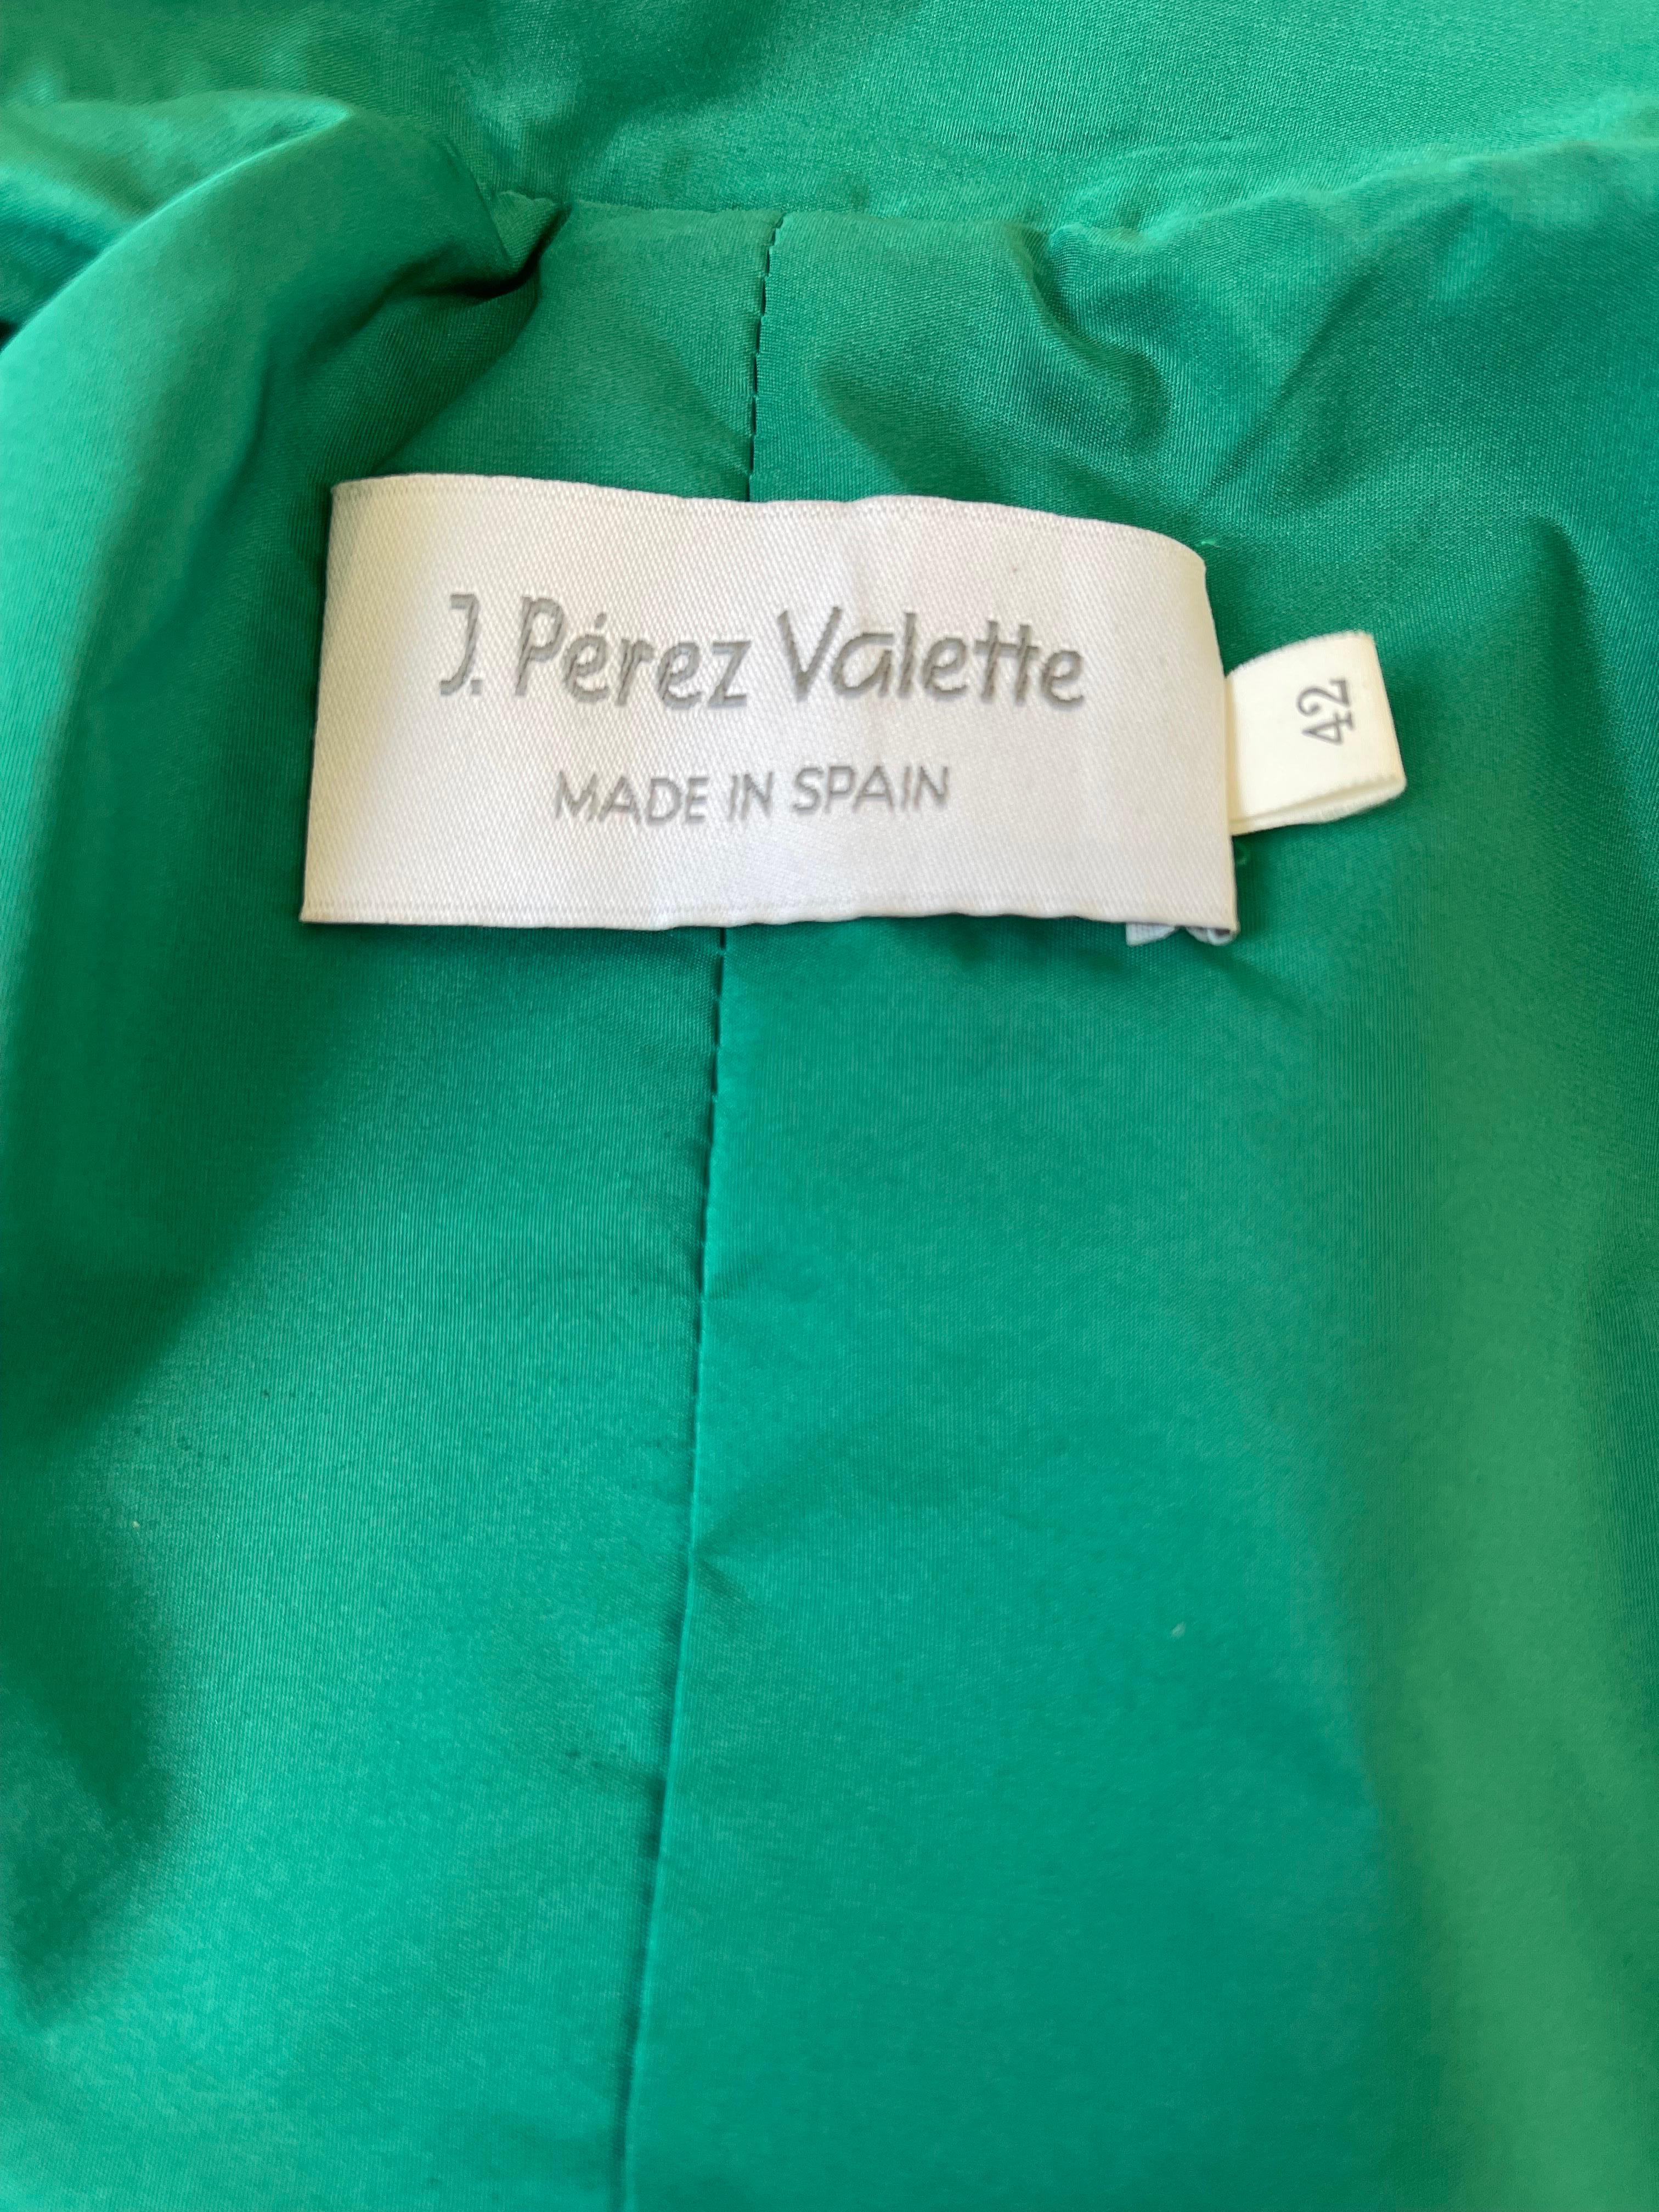 Gorgeous Avant Garde J. PEREZ VALETTE P/V 2022 kelly green silk taffeta gown ! This renowned Spanish designer is based in Barcelona, and is known for hi haute couture like craftsmanship. Tailored bodice with large ruffle, rhinestone encrusted